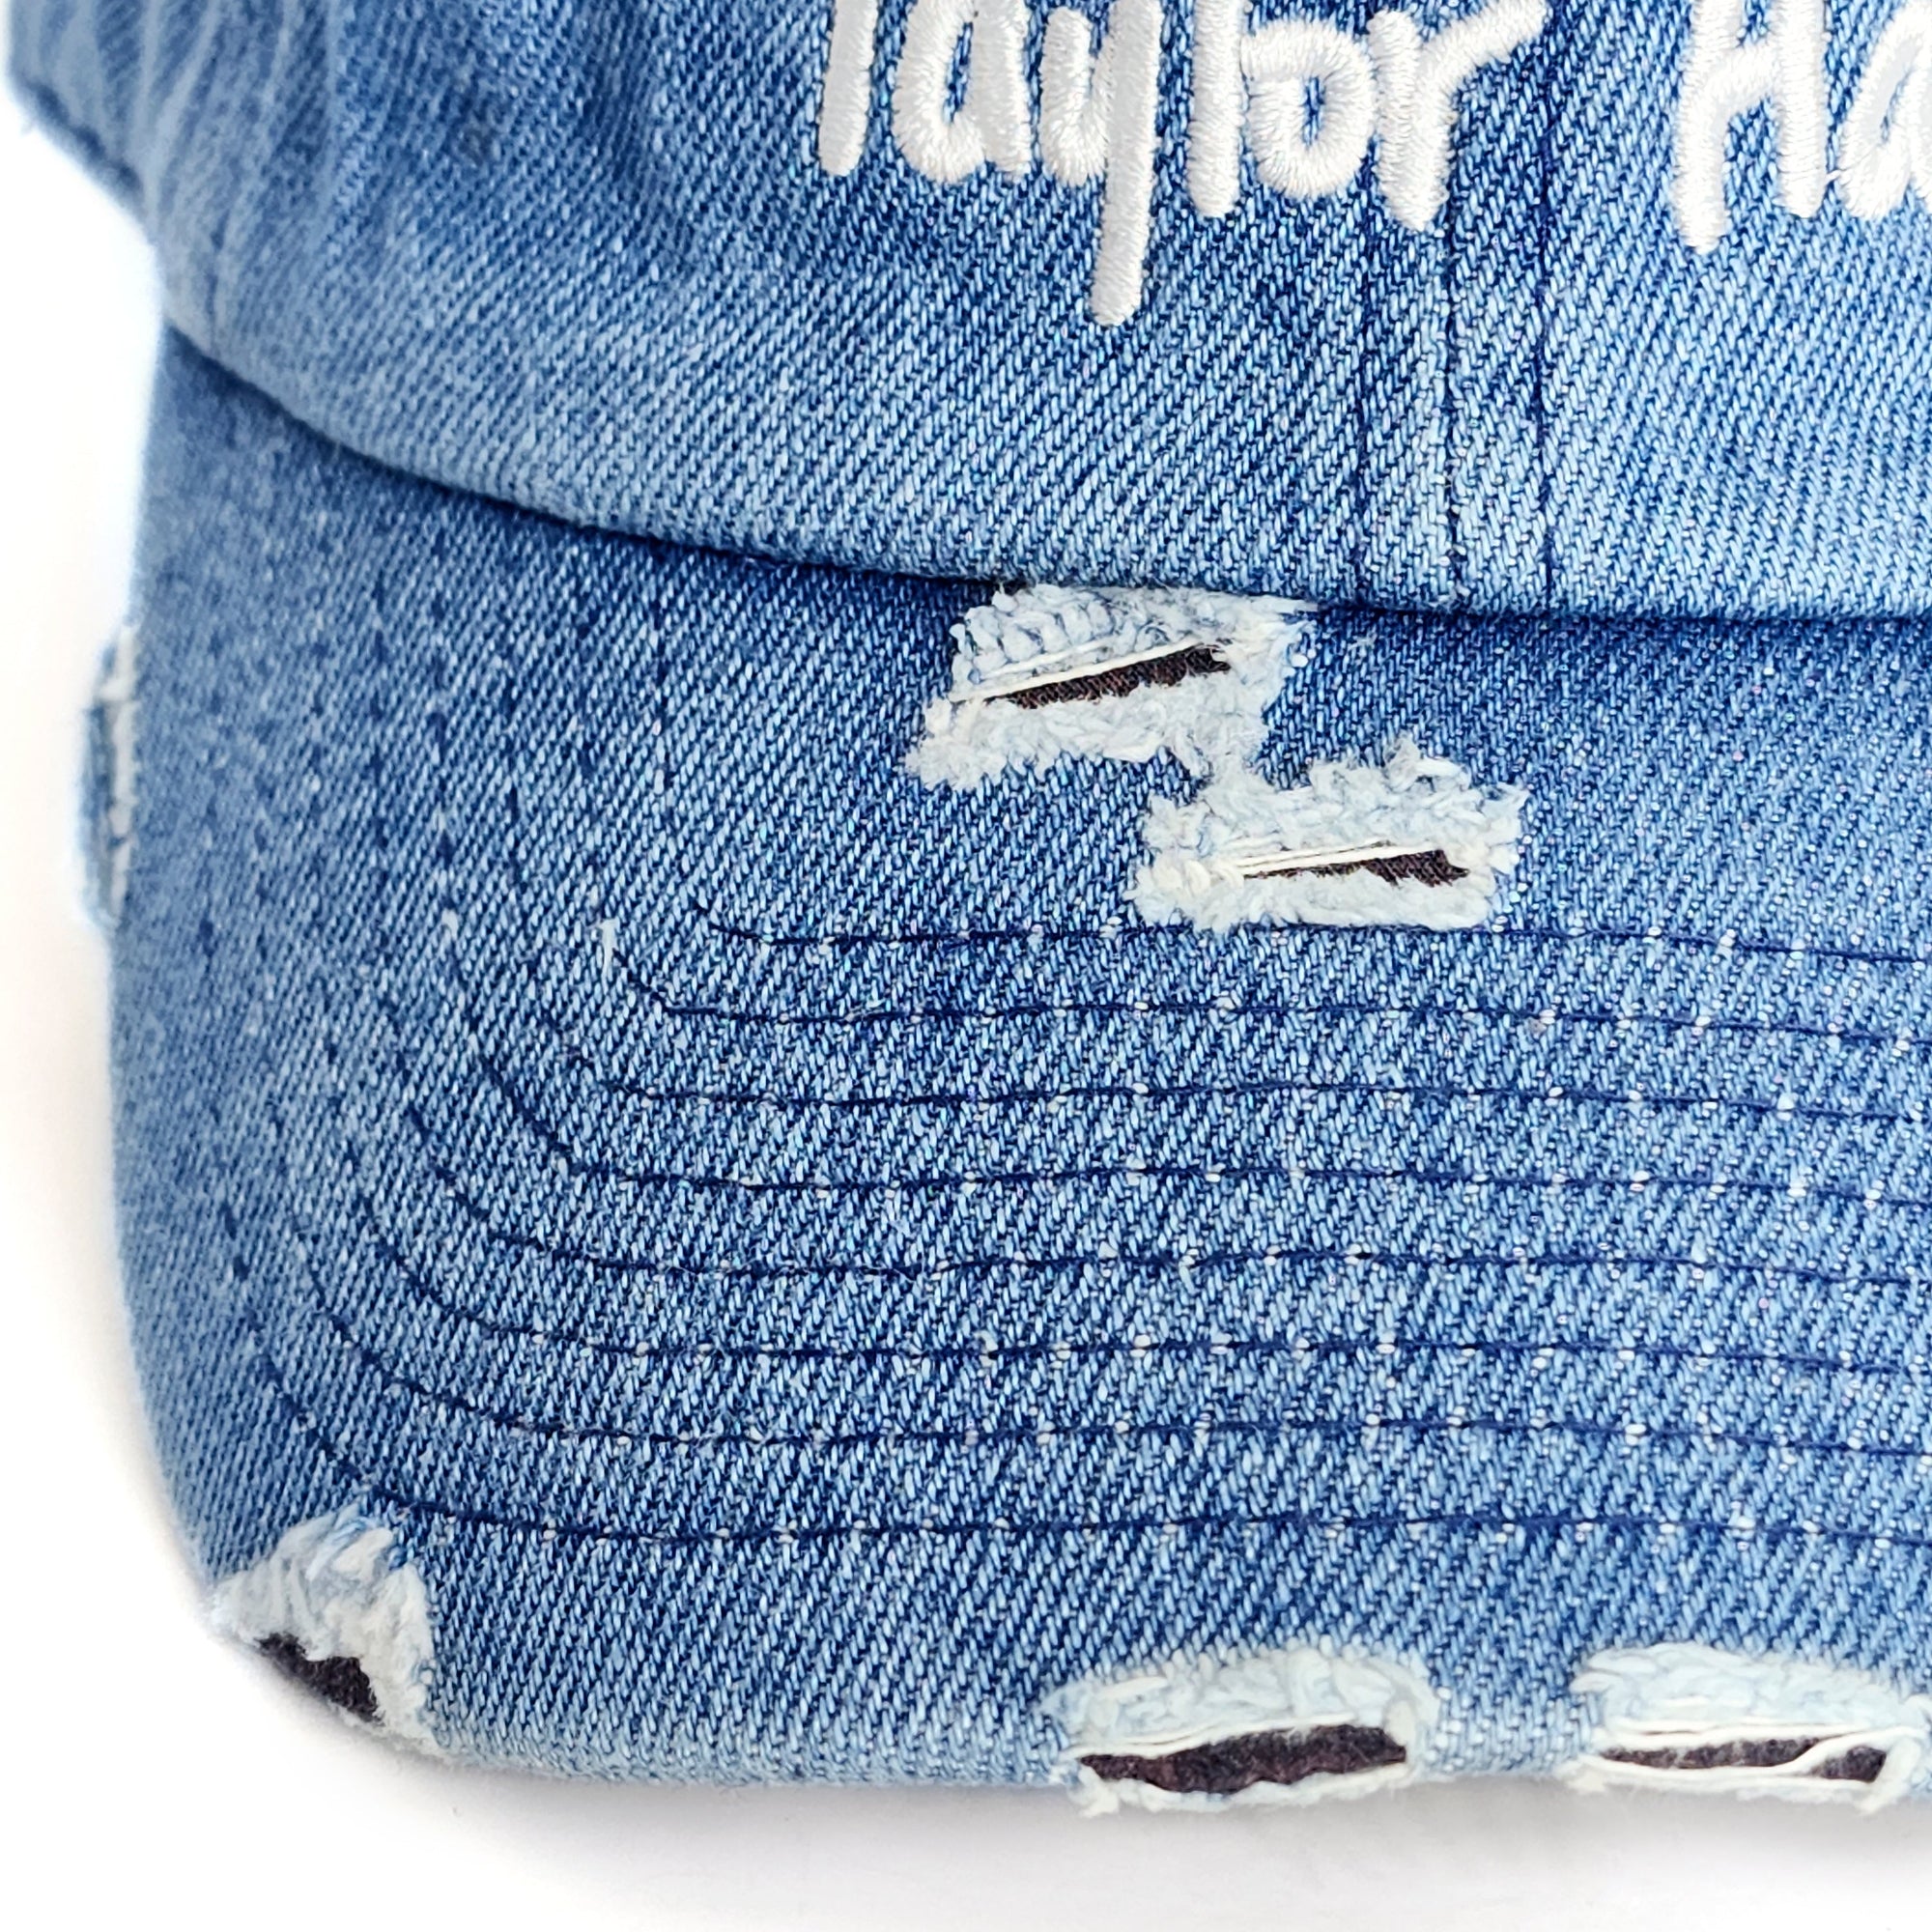 Contant Avenue denim blue distressed baseball cap with white Taylor Ham Pork Roll embroidery design